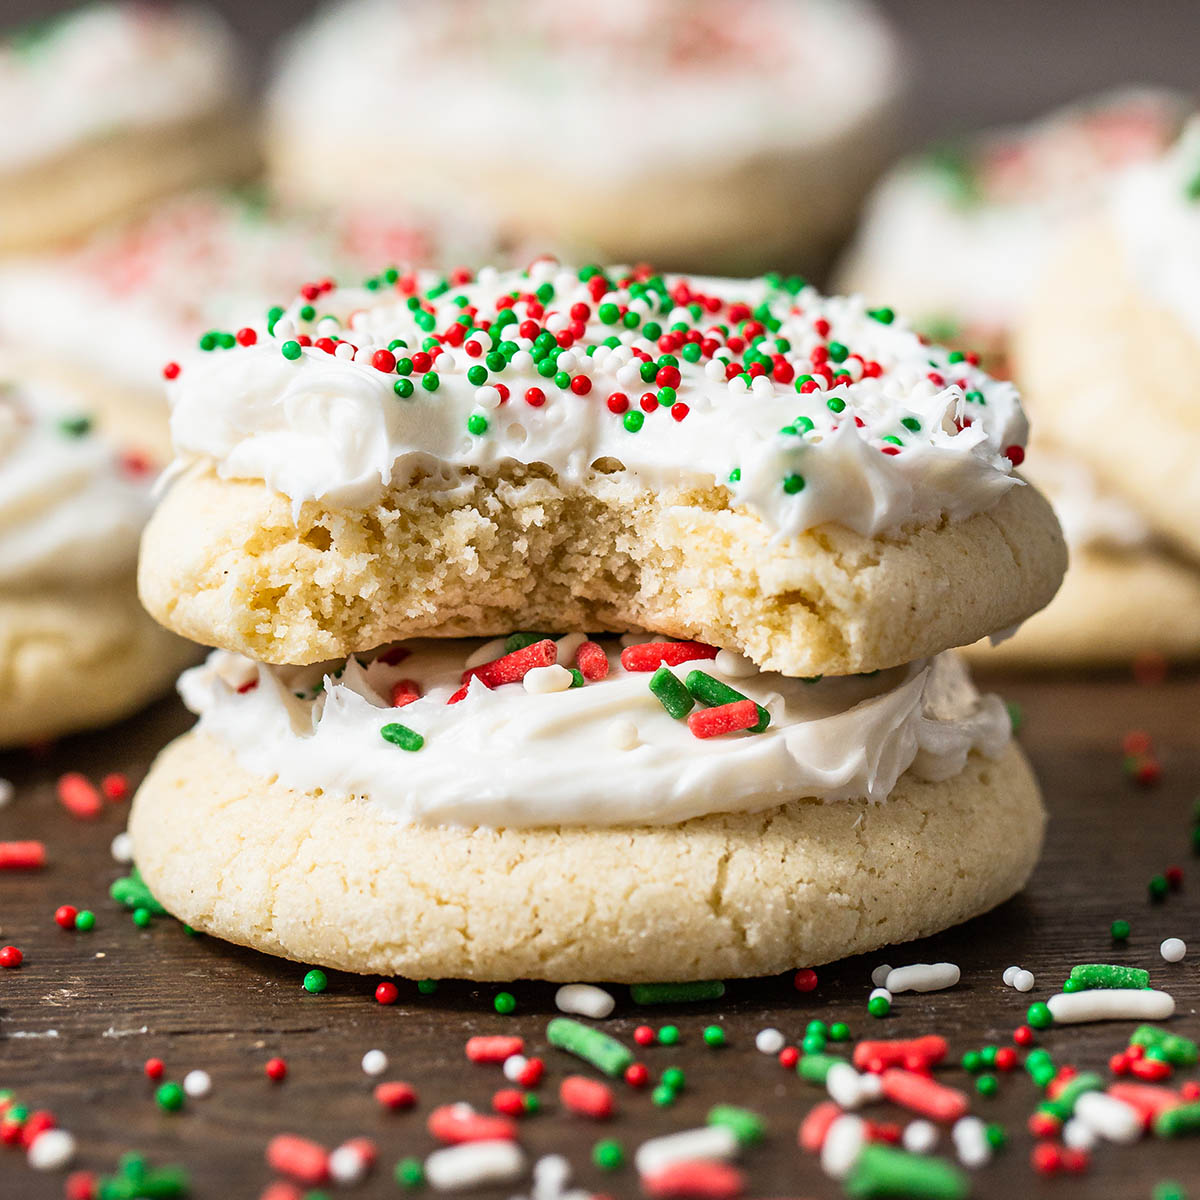 10 Gluten Free Christmas Cookies and Treats